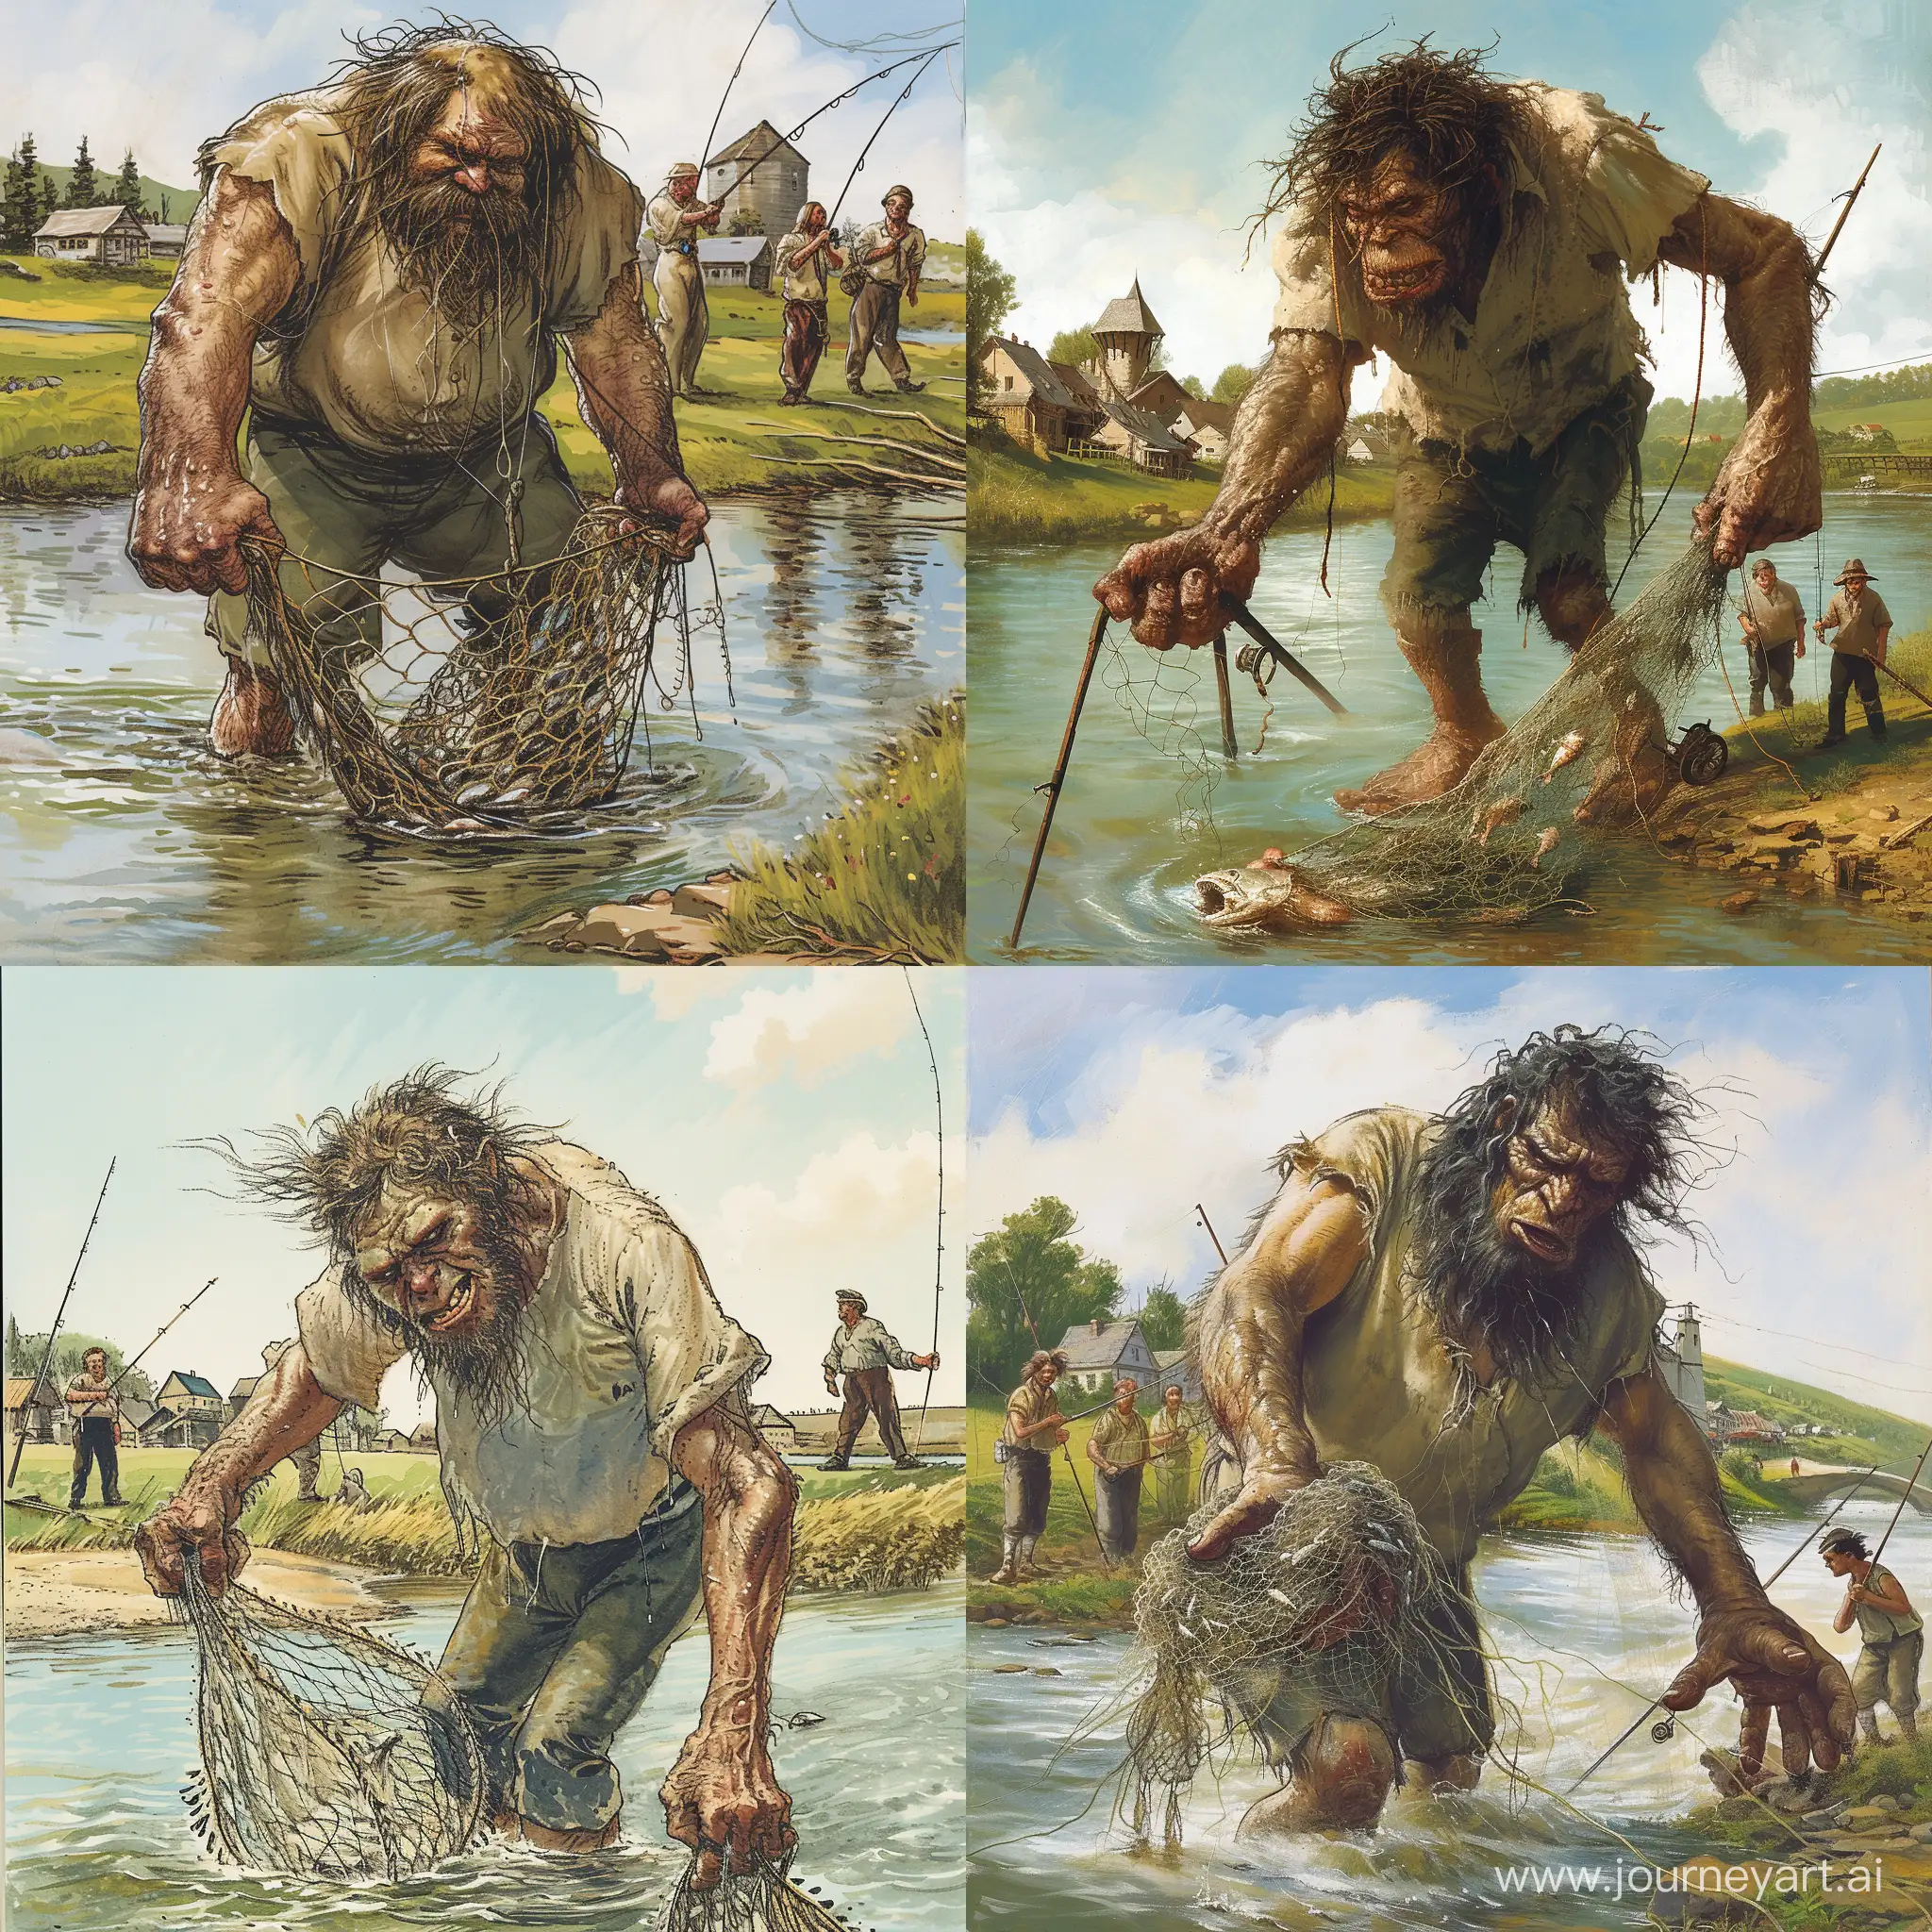 Giant-Fisherman-Hauling-a-Bounty-from-the-River